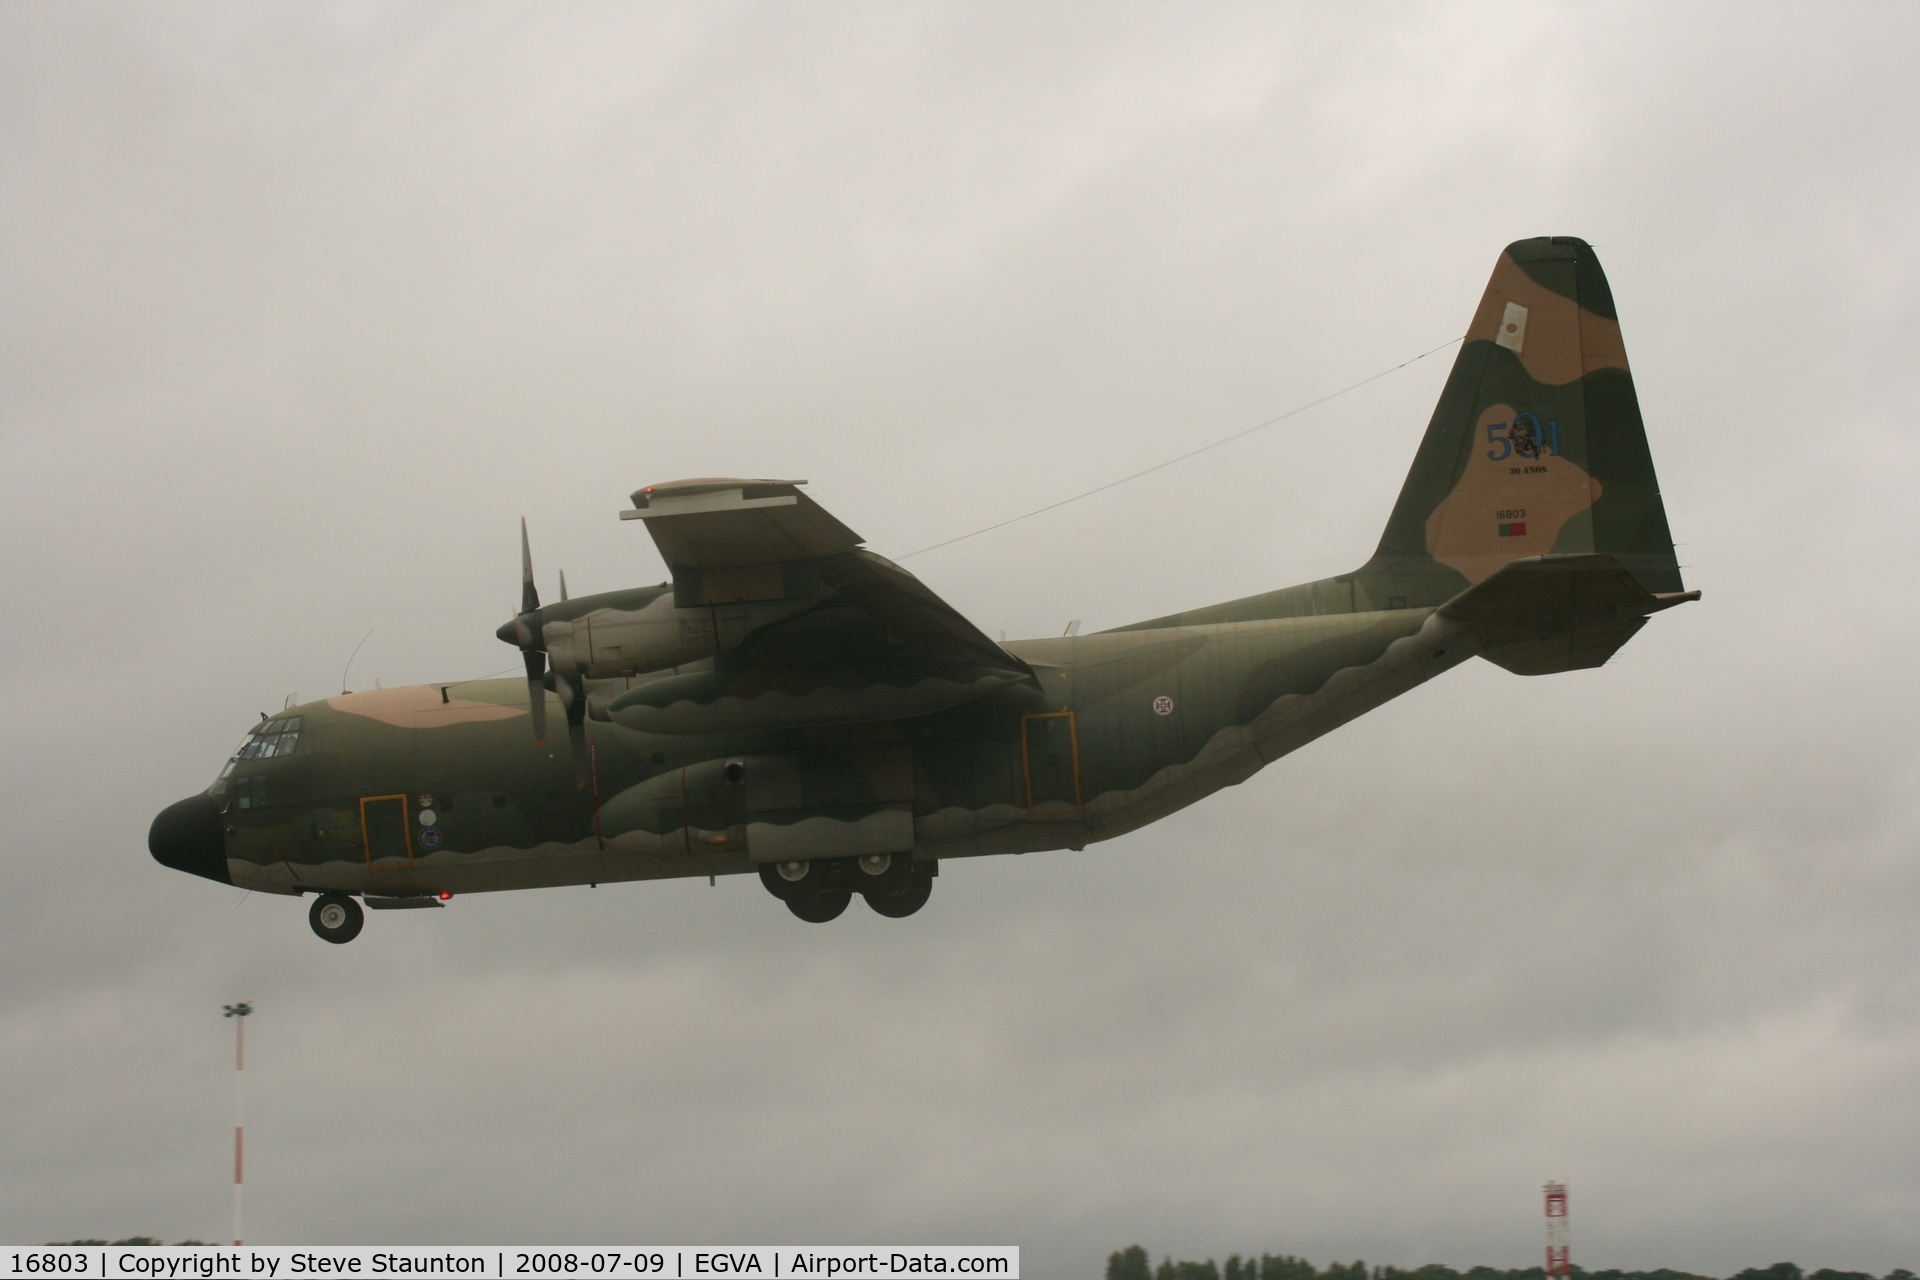 16803, 1978 Lockheed C-130H Hercules C/N 382-4772, Taken at the Royal International Air Tattoo 2008 during arrivals and departures (show days cancelled due to bad weather)